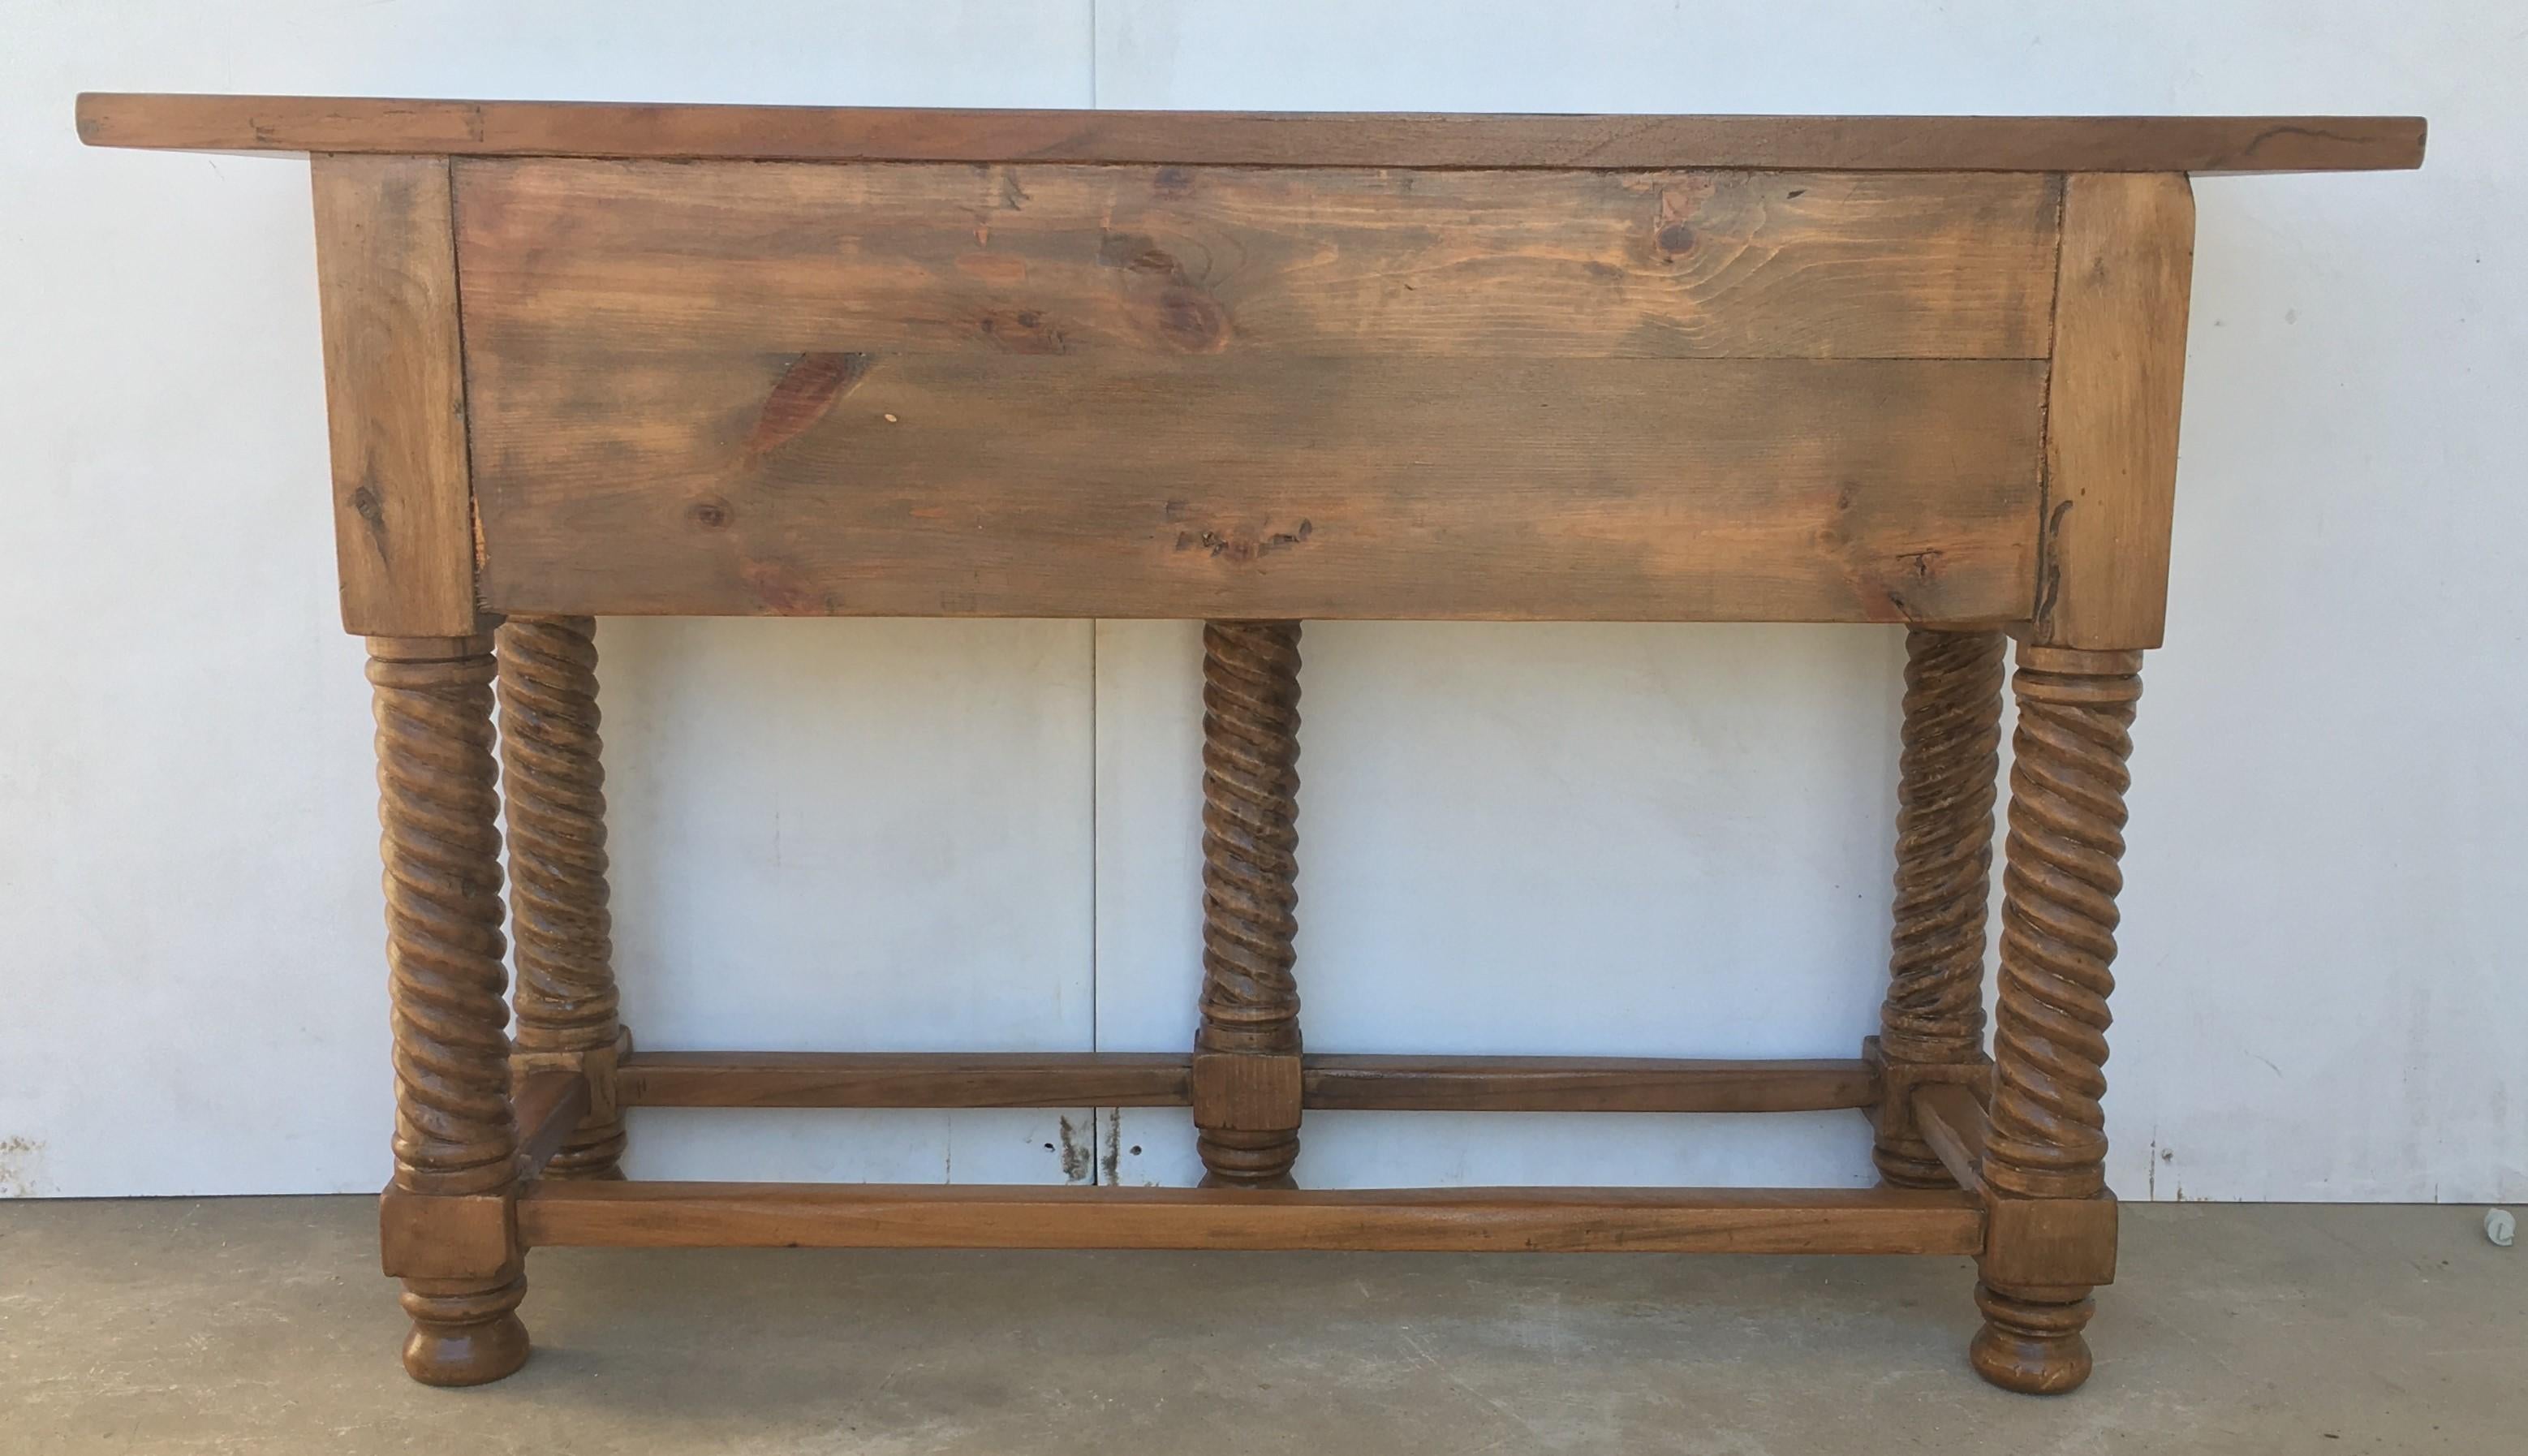 A 19th century walnut console table with a slab top above a frieze with two drawers with front decorated with carved geometrical motifs and incised with additional decoration and a single iron pull in each drawer. The table is supported on a